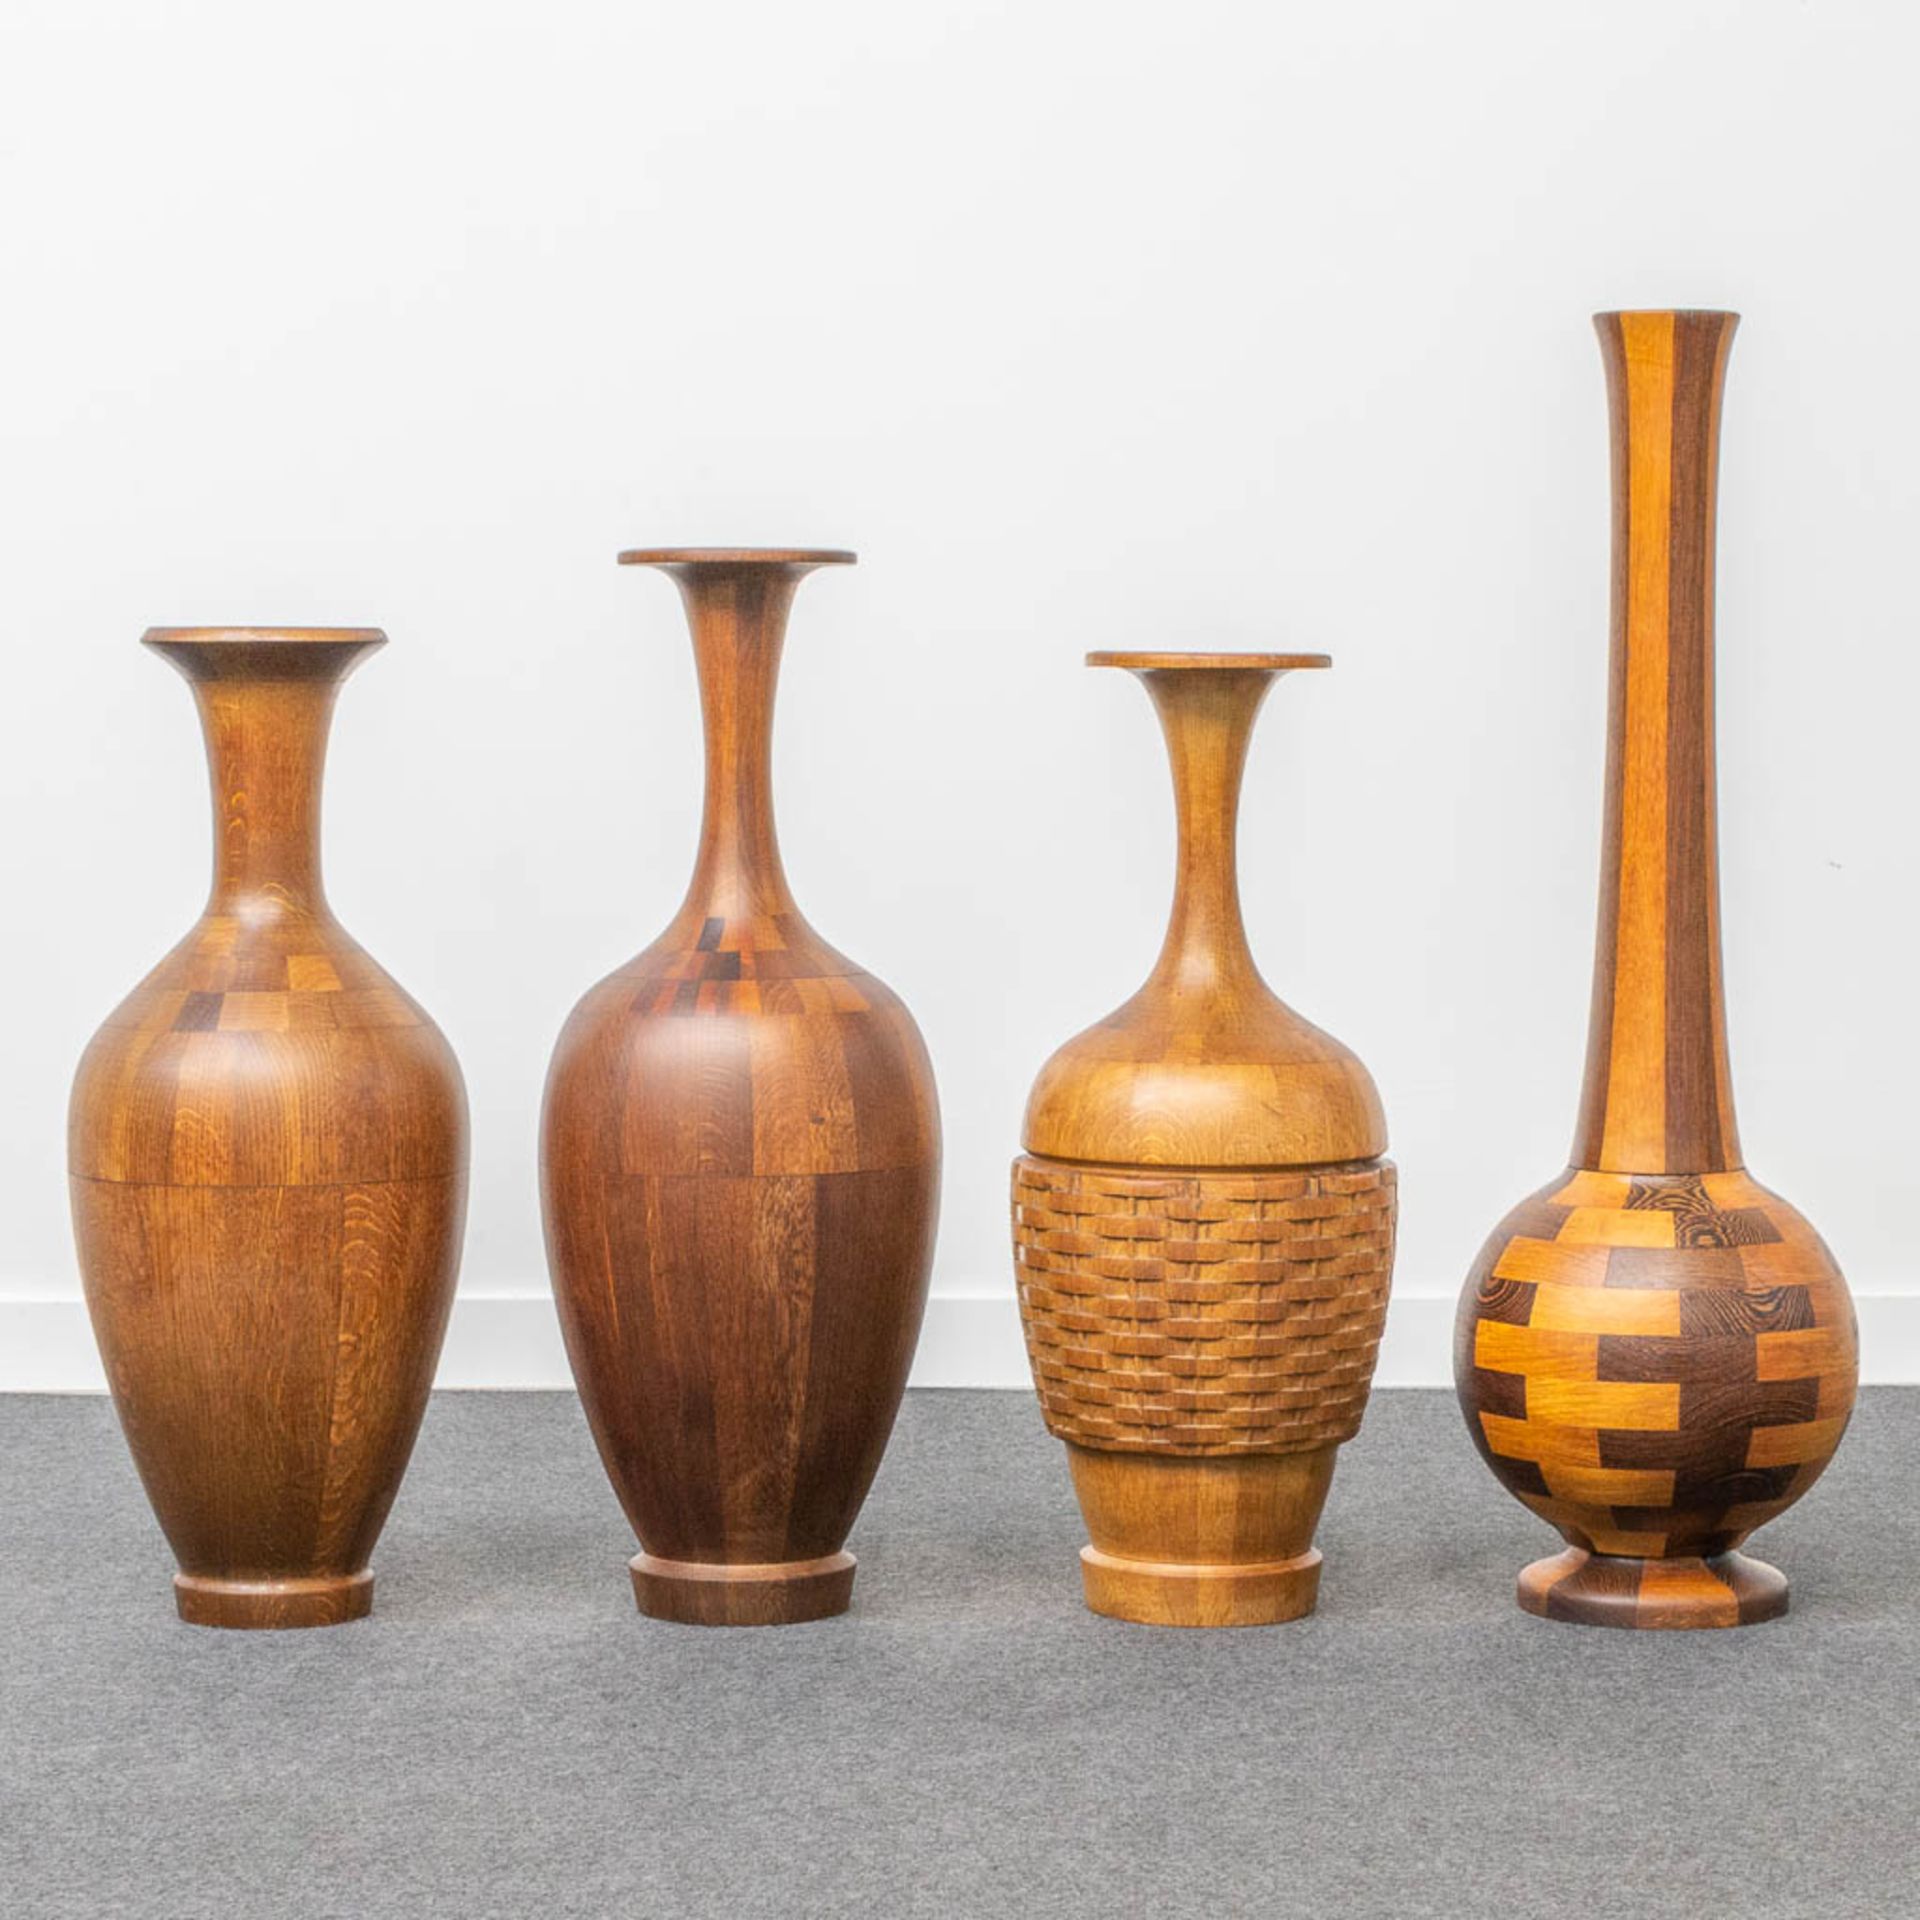 A collection of 4 wood-turned vases with inlay, made by DeCoene in Kortijk, Belgium.